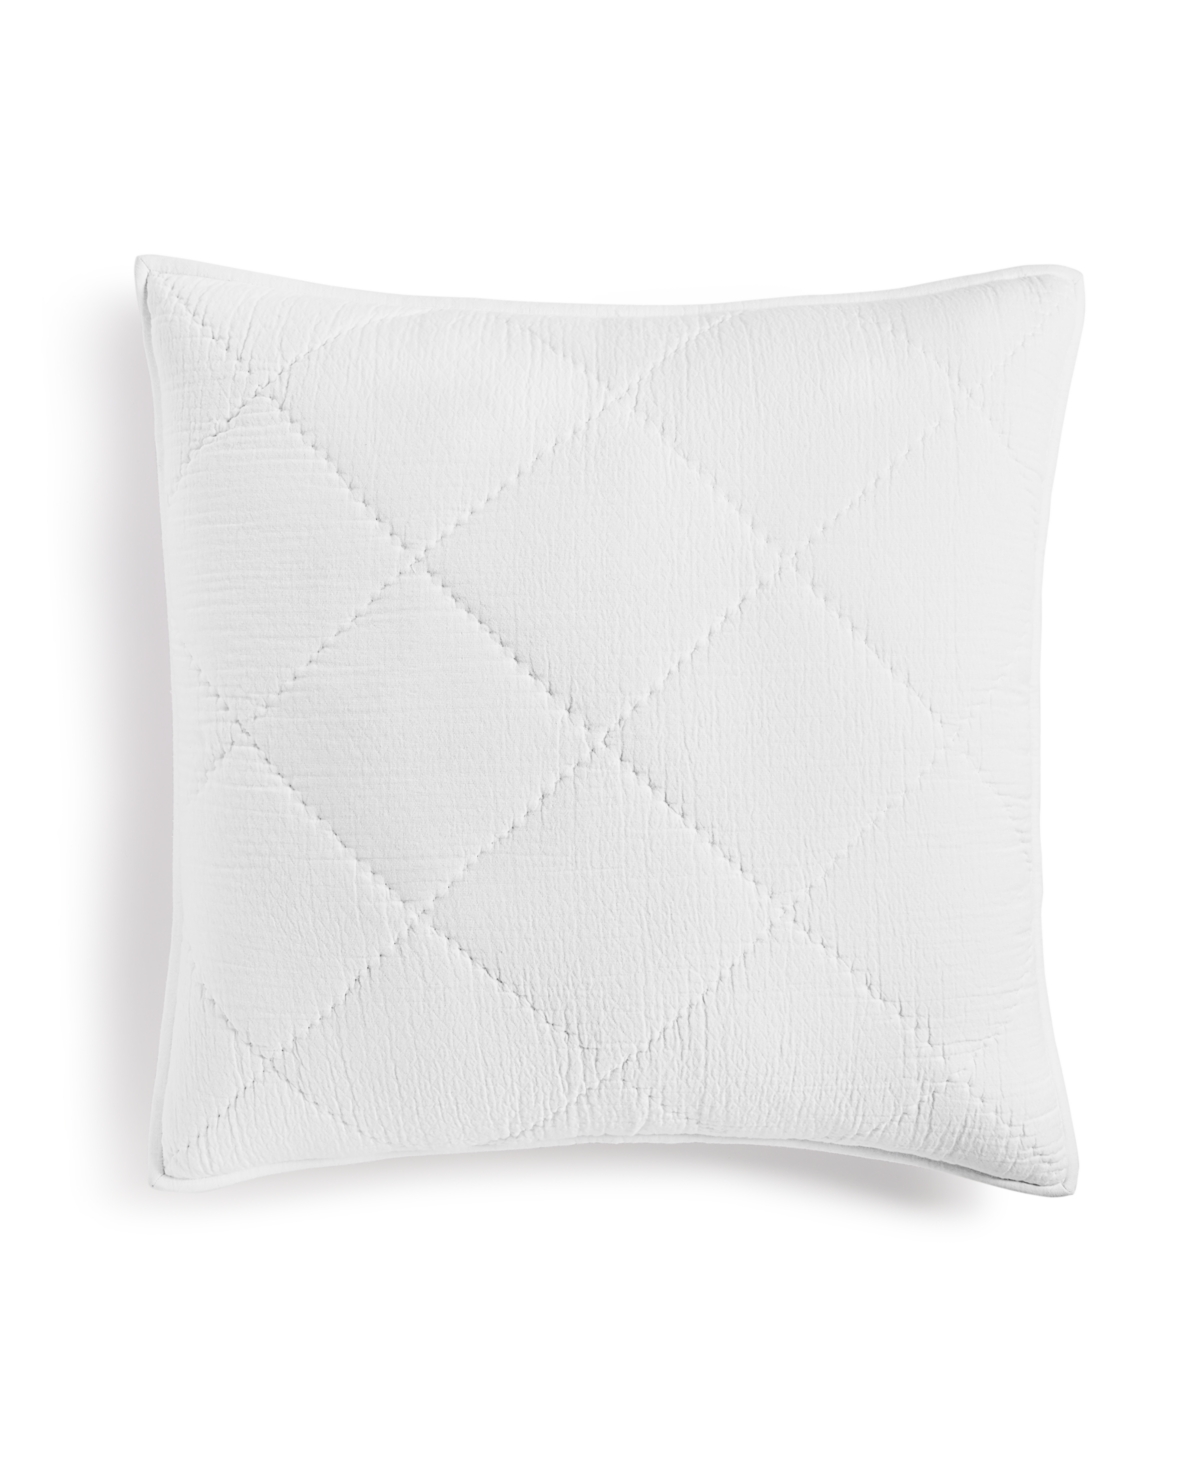 Closeout! Hotel Collection Dobby Diamond Quilted Sham, European, Created for Macy's - Natural